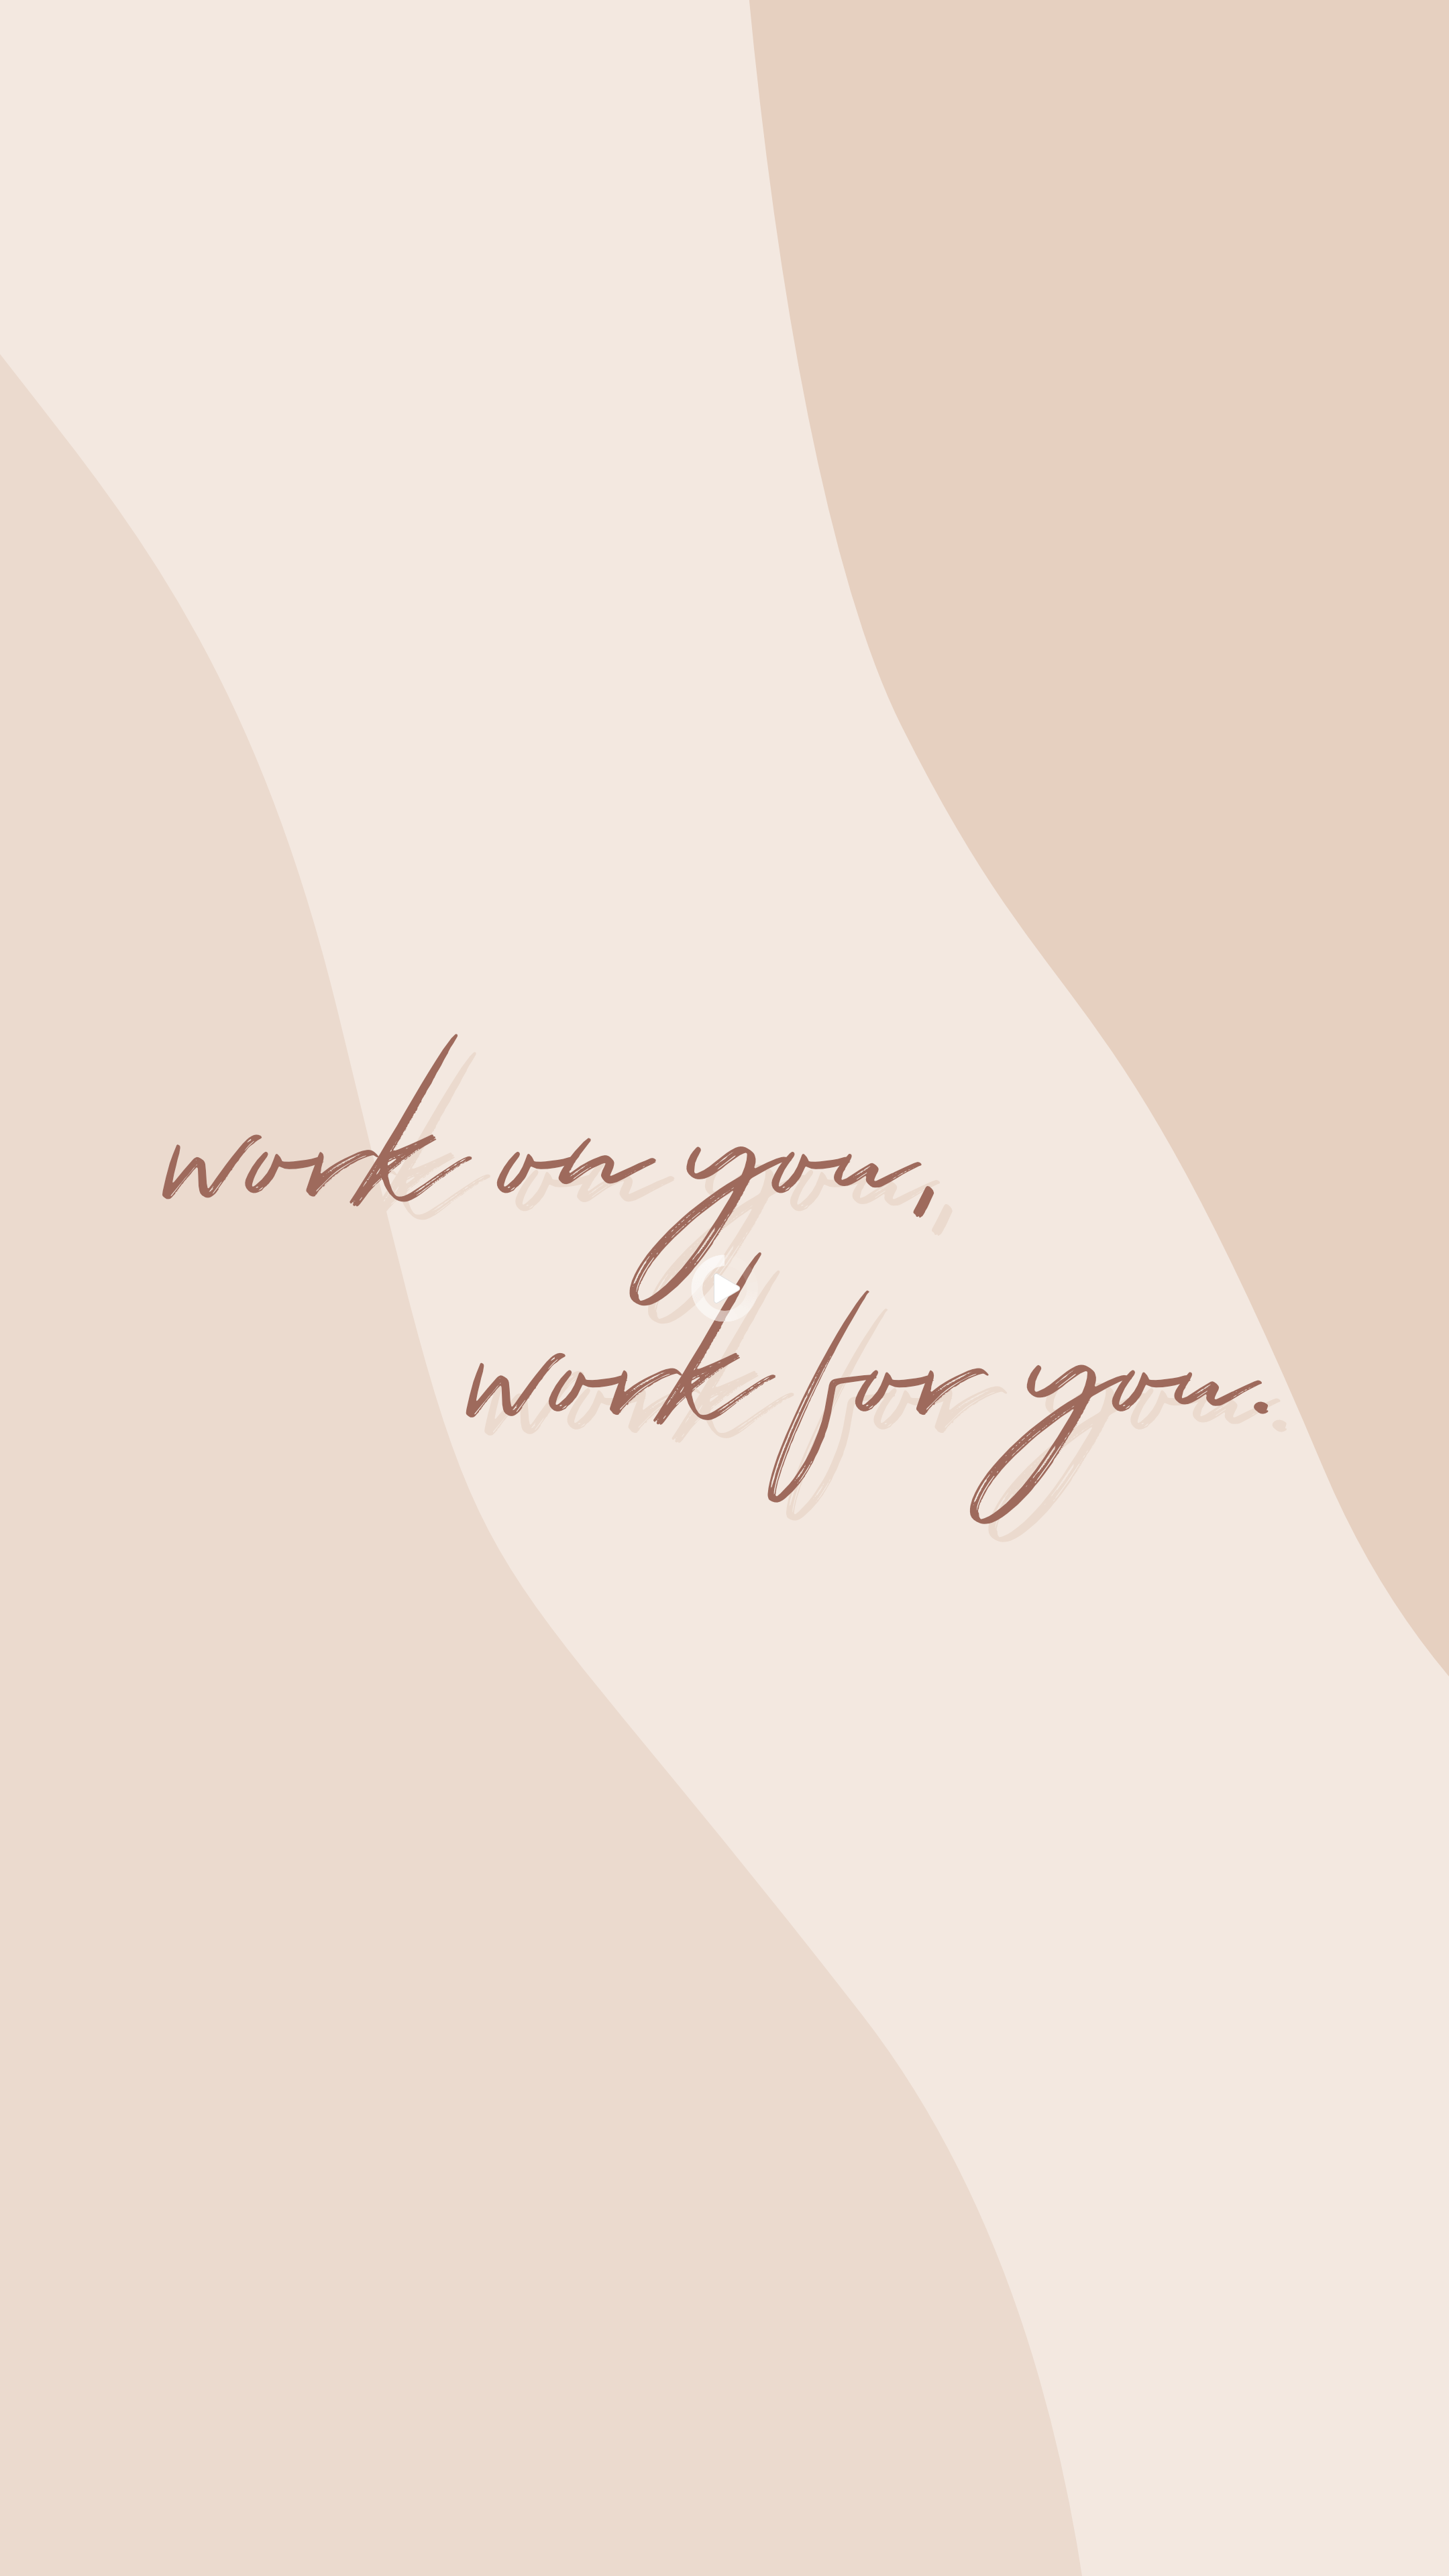 Quotes Aesthetic 4k Wallpaper